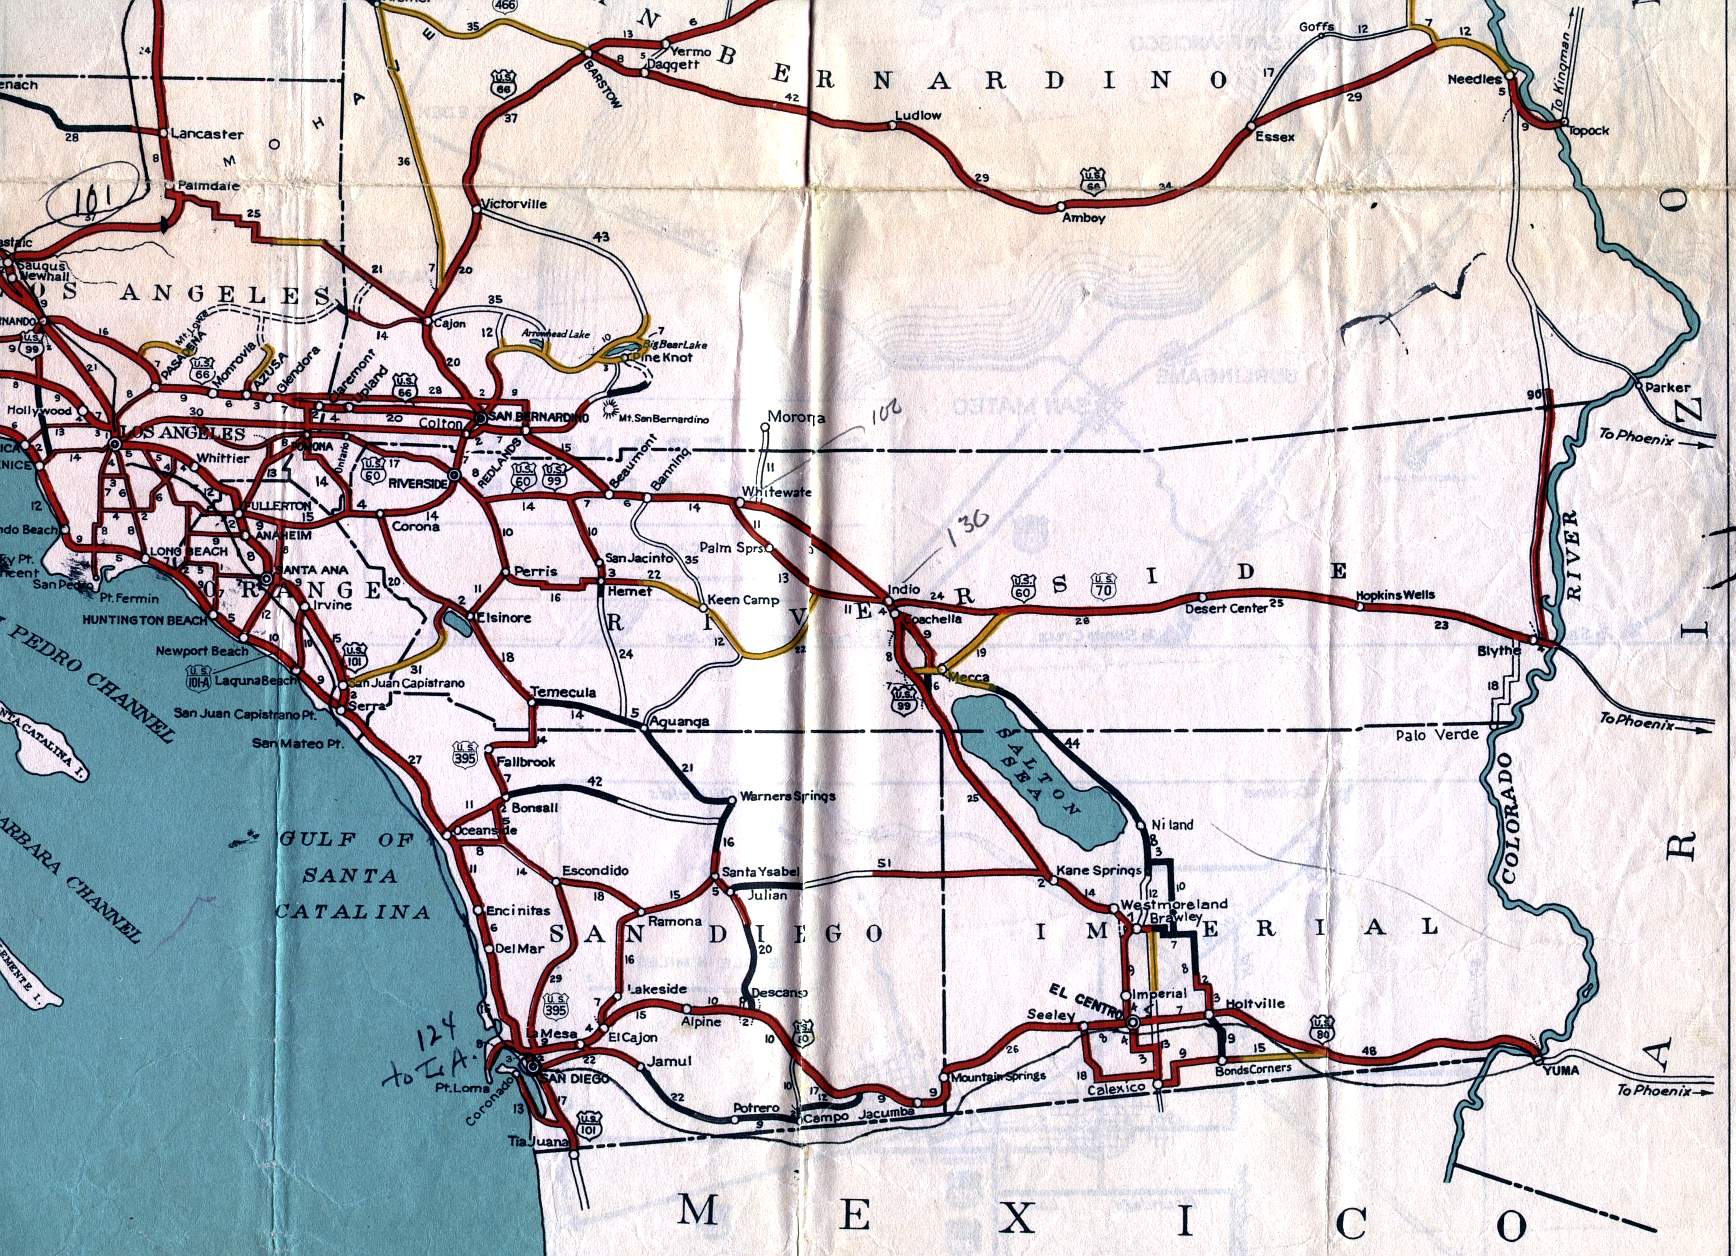 Southern California on the 1936 California official highway map